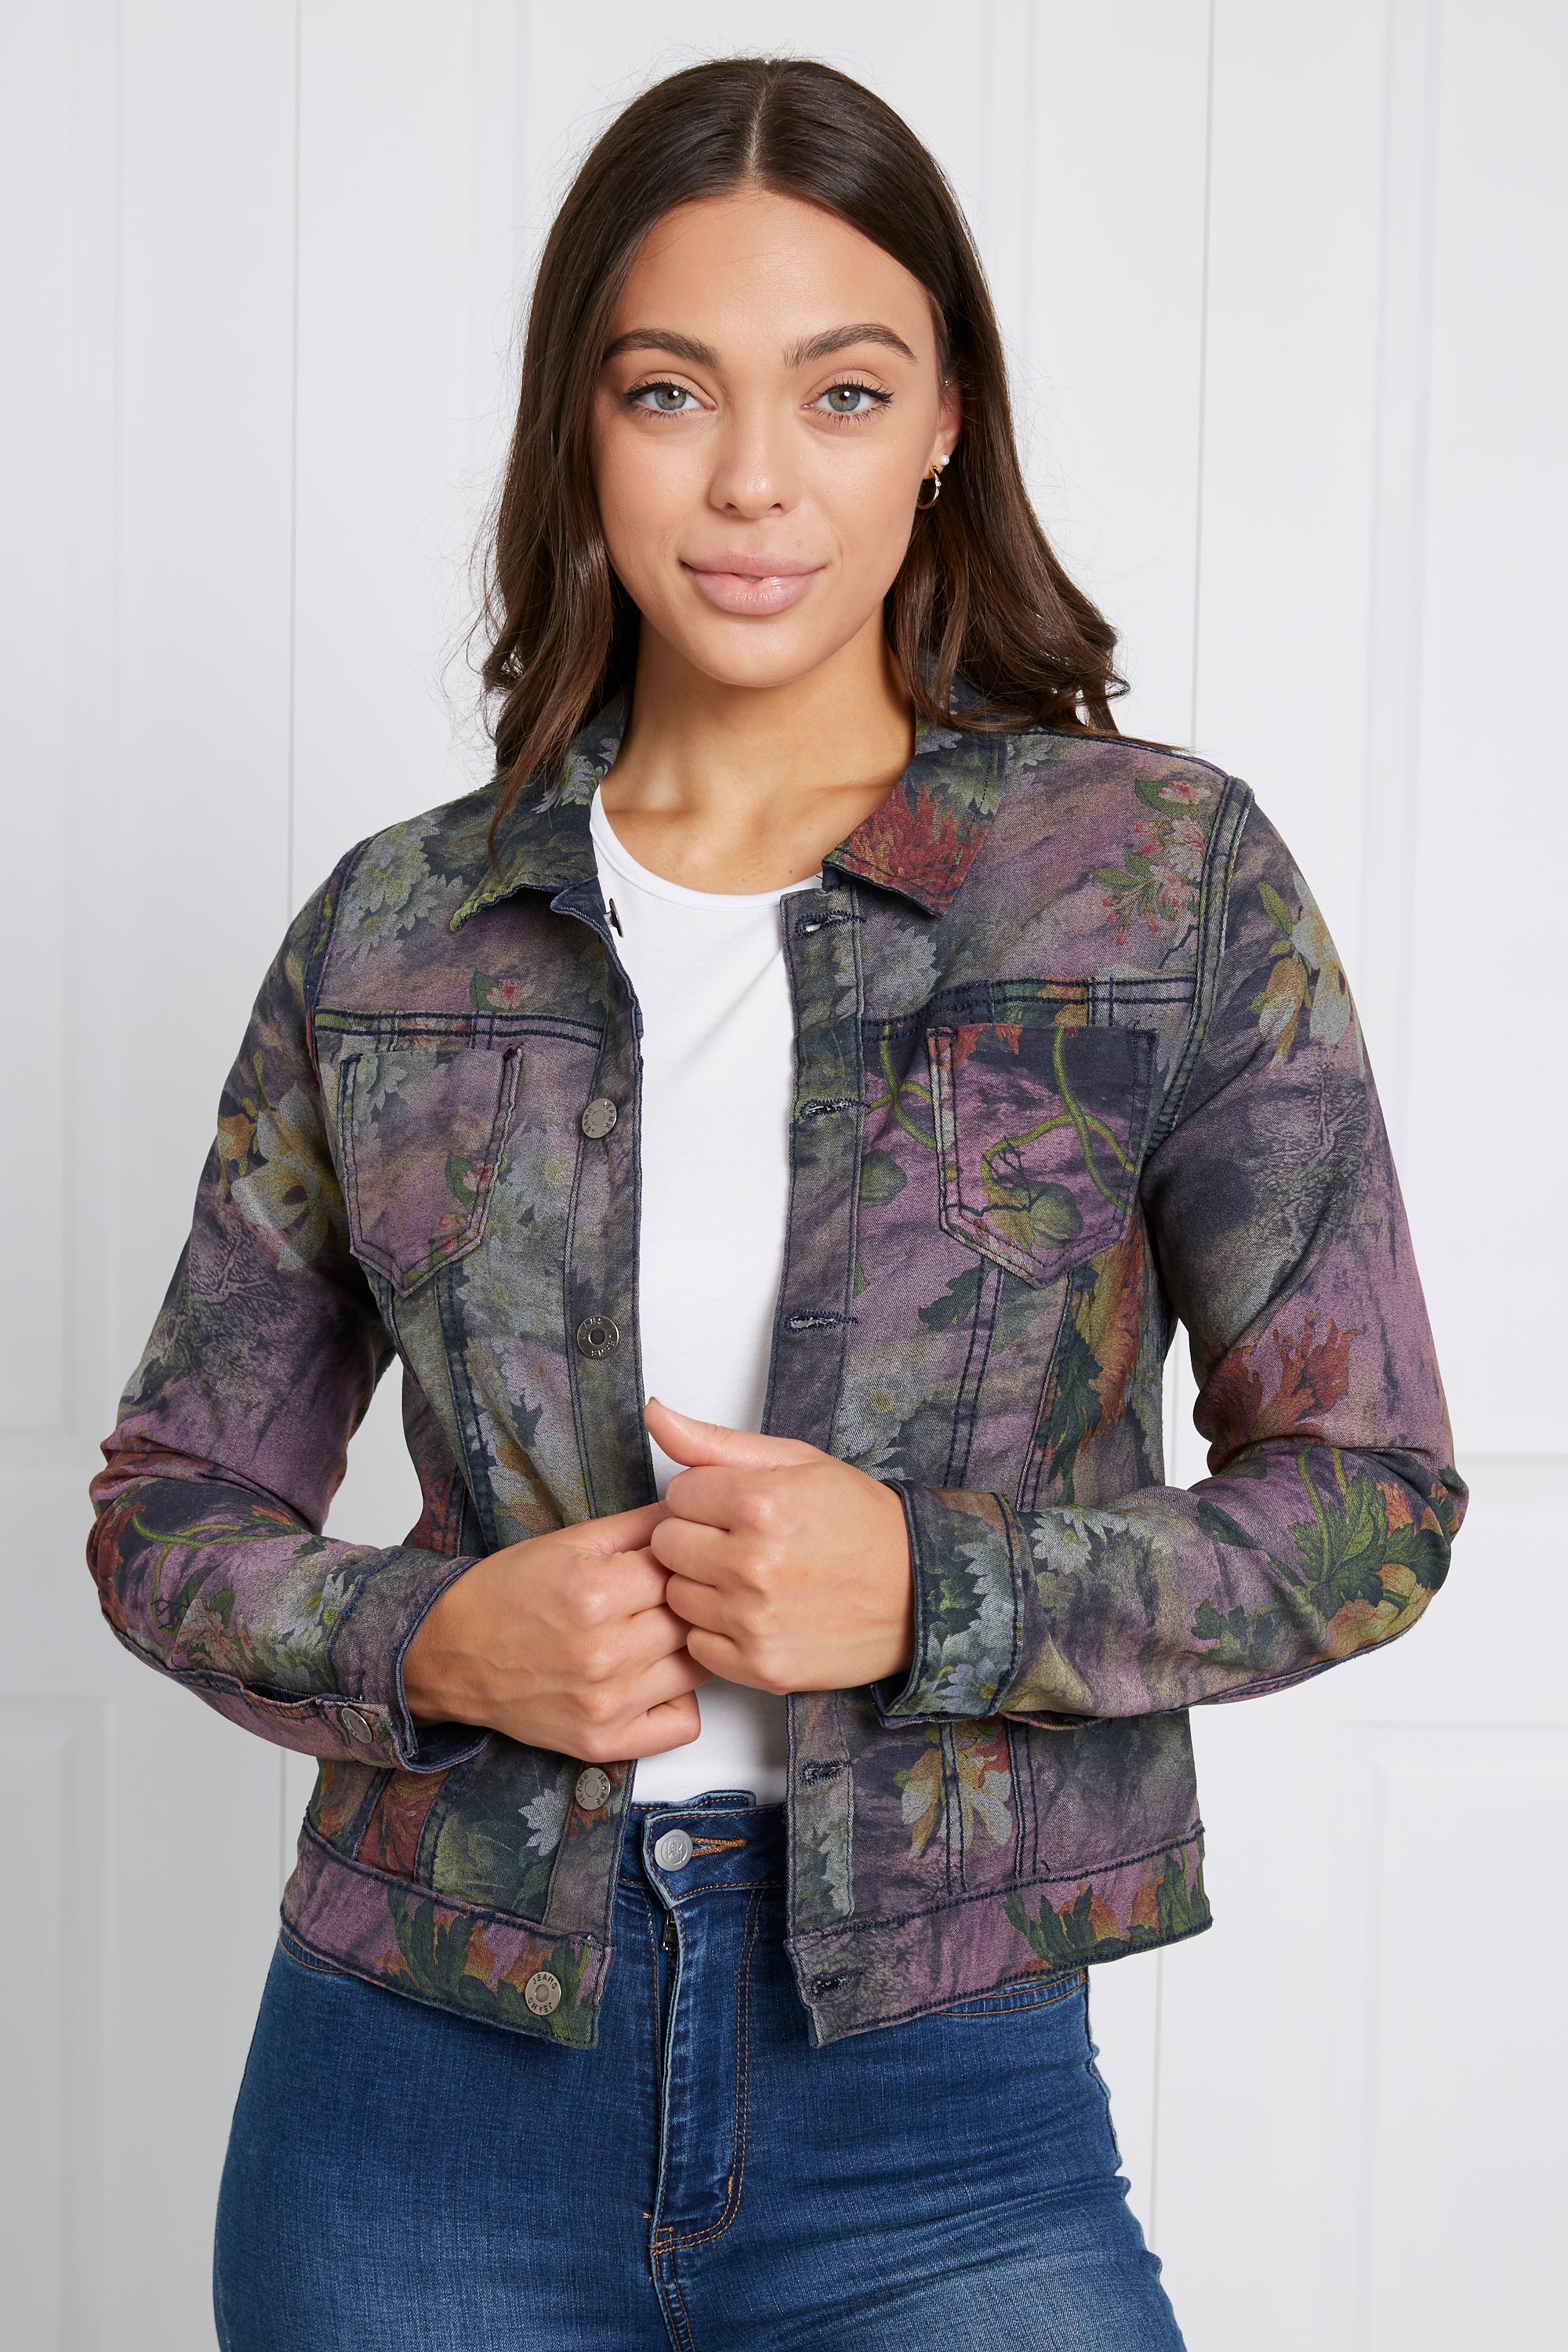 TOP 5 JACKETS FOR EVERY WARDROBE